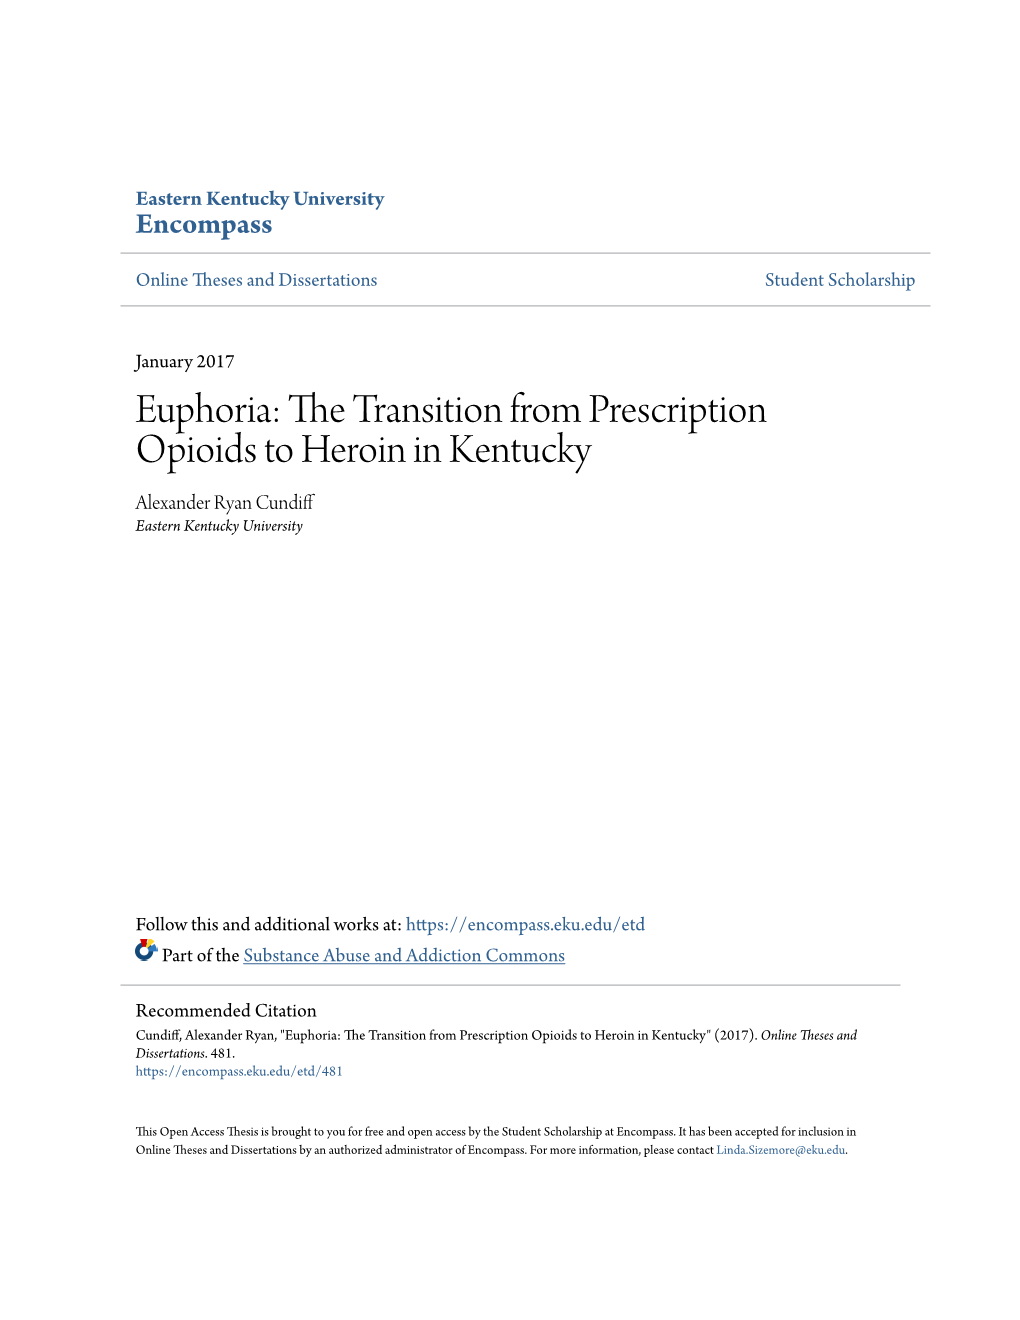 The Transition from Prescription Opioids to Heroin in Kentucky